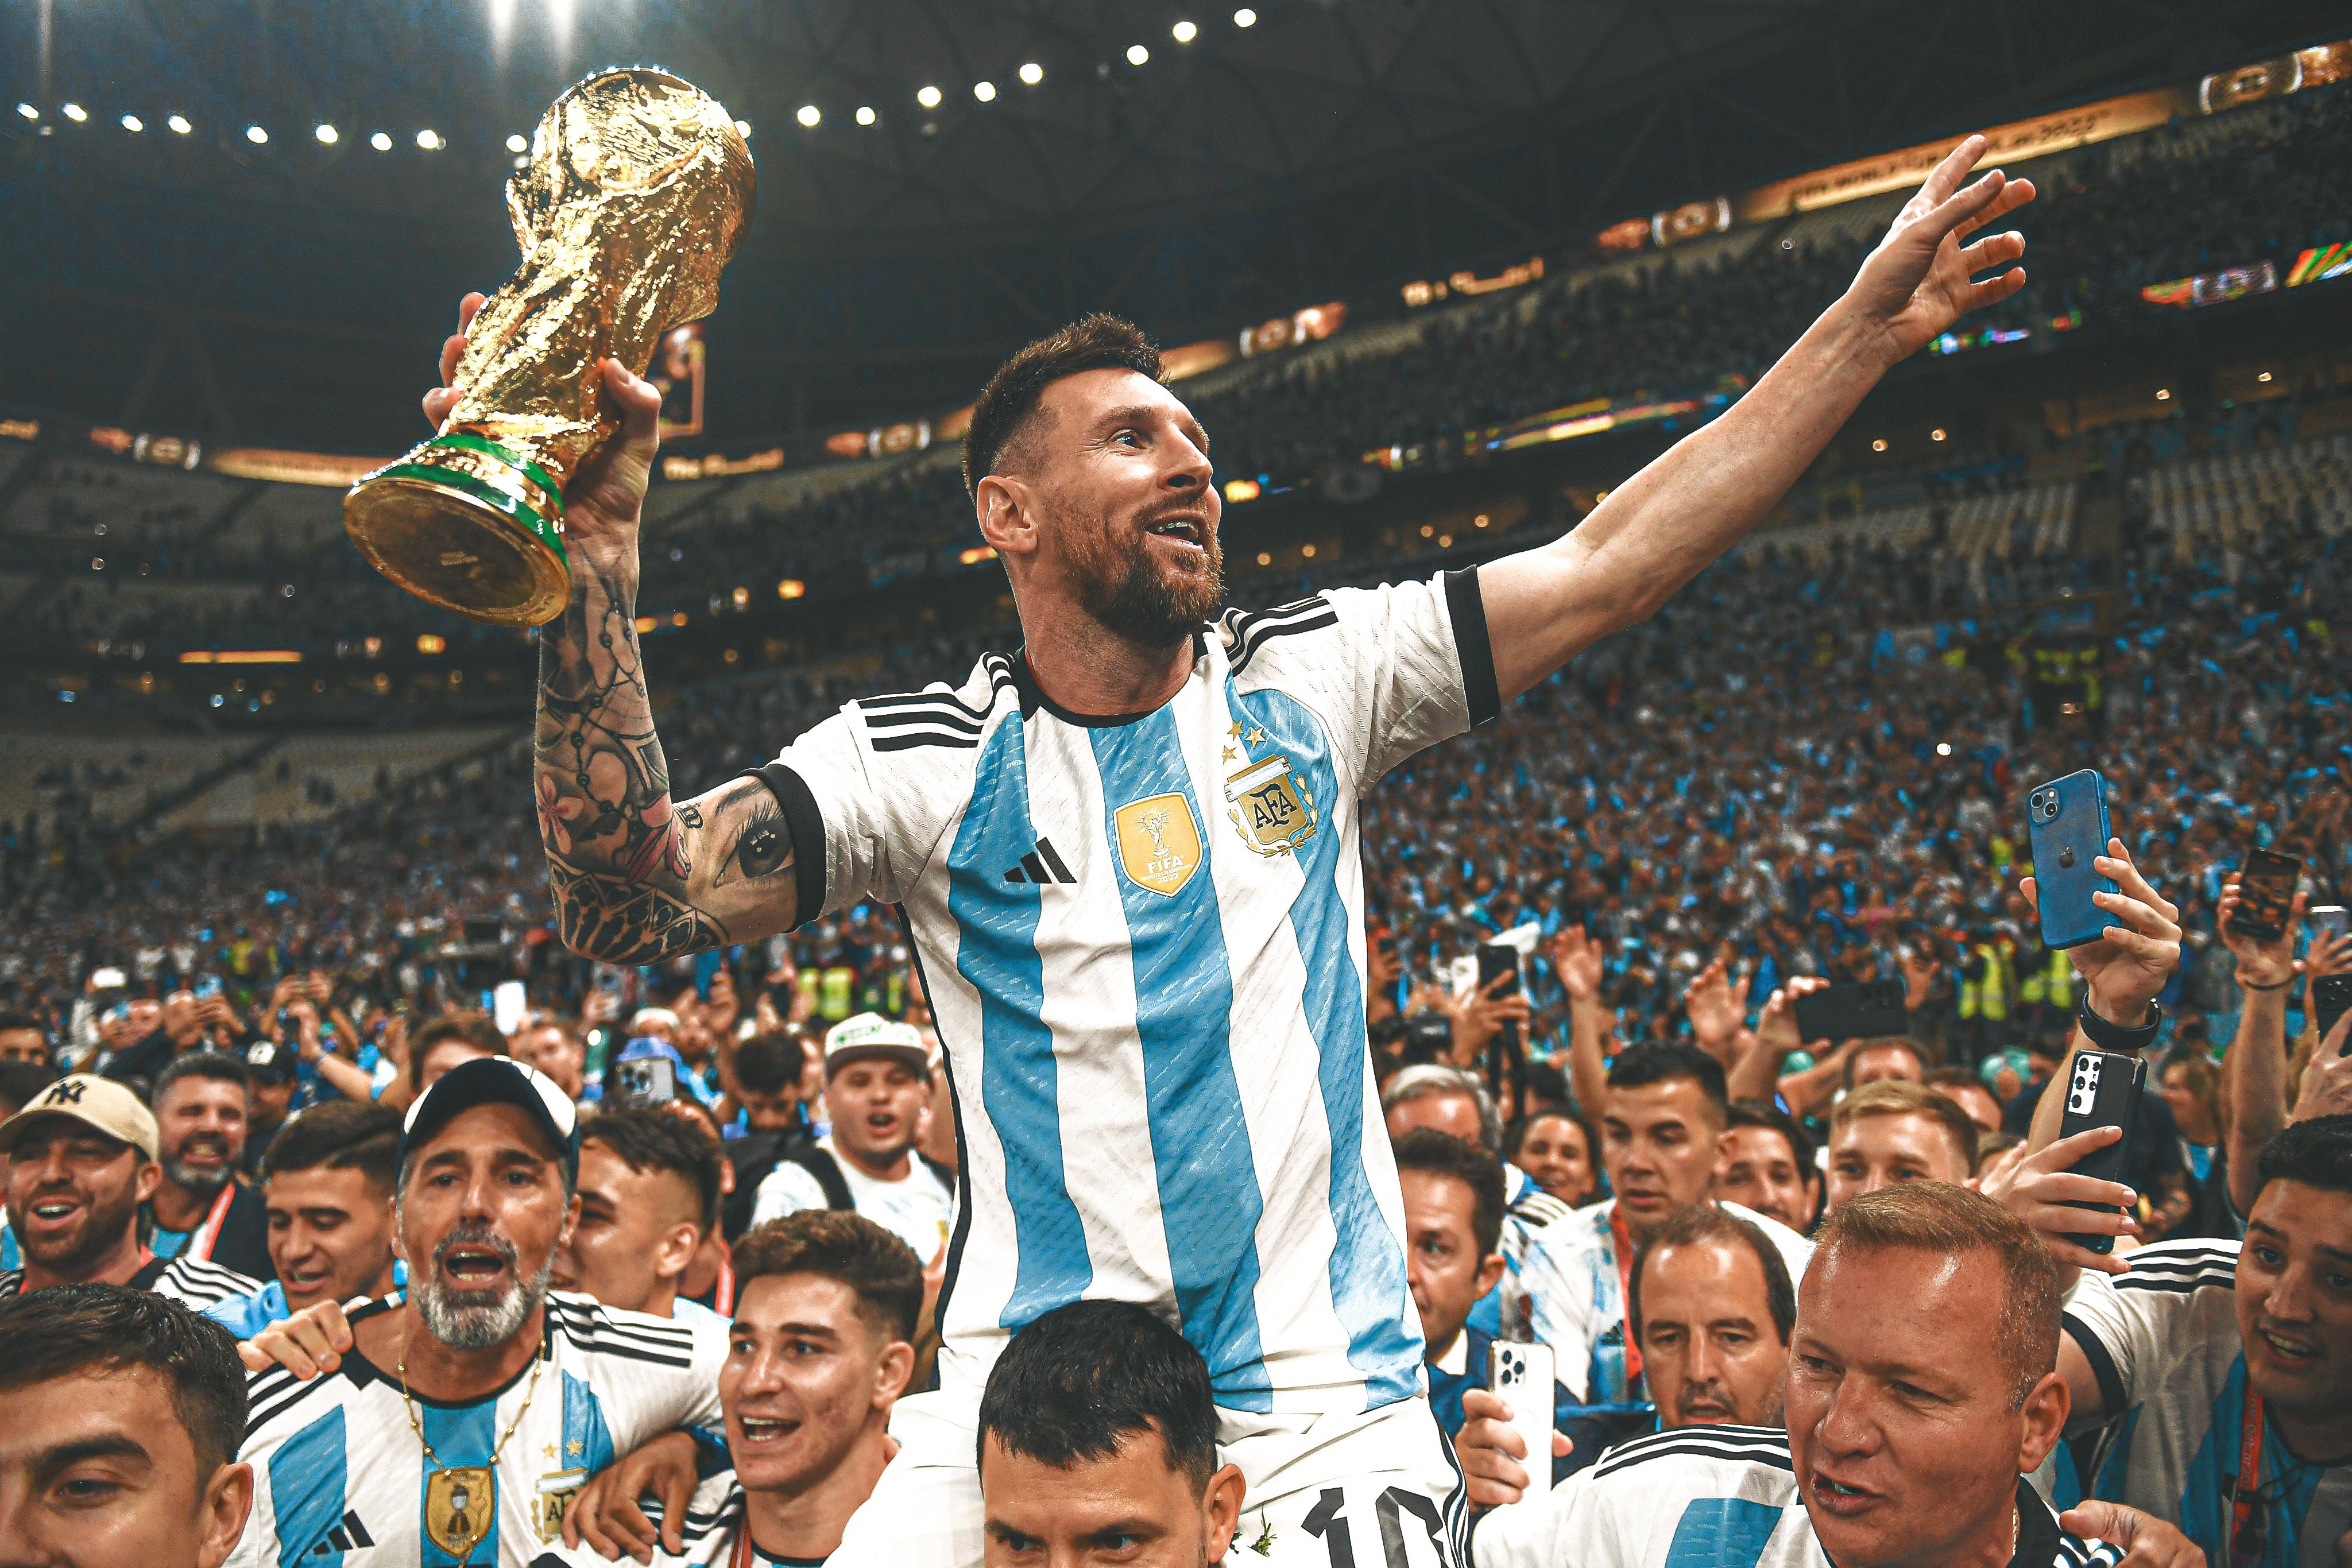 Lionel Messi lifiting the 2022 FIFA World Cup trophy [4096x2731]